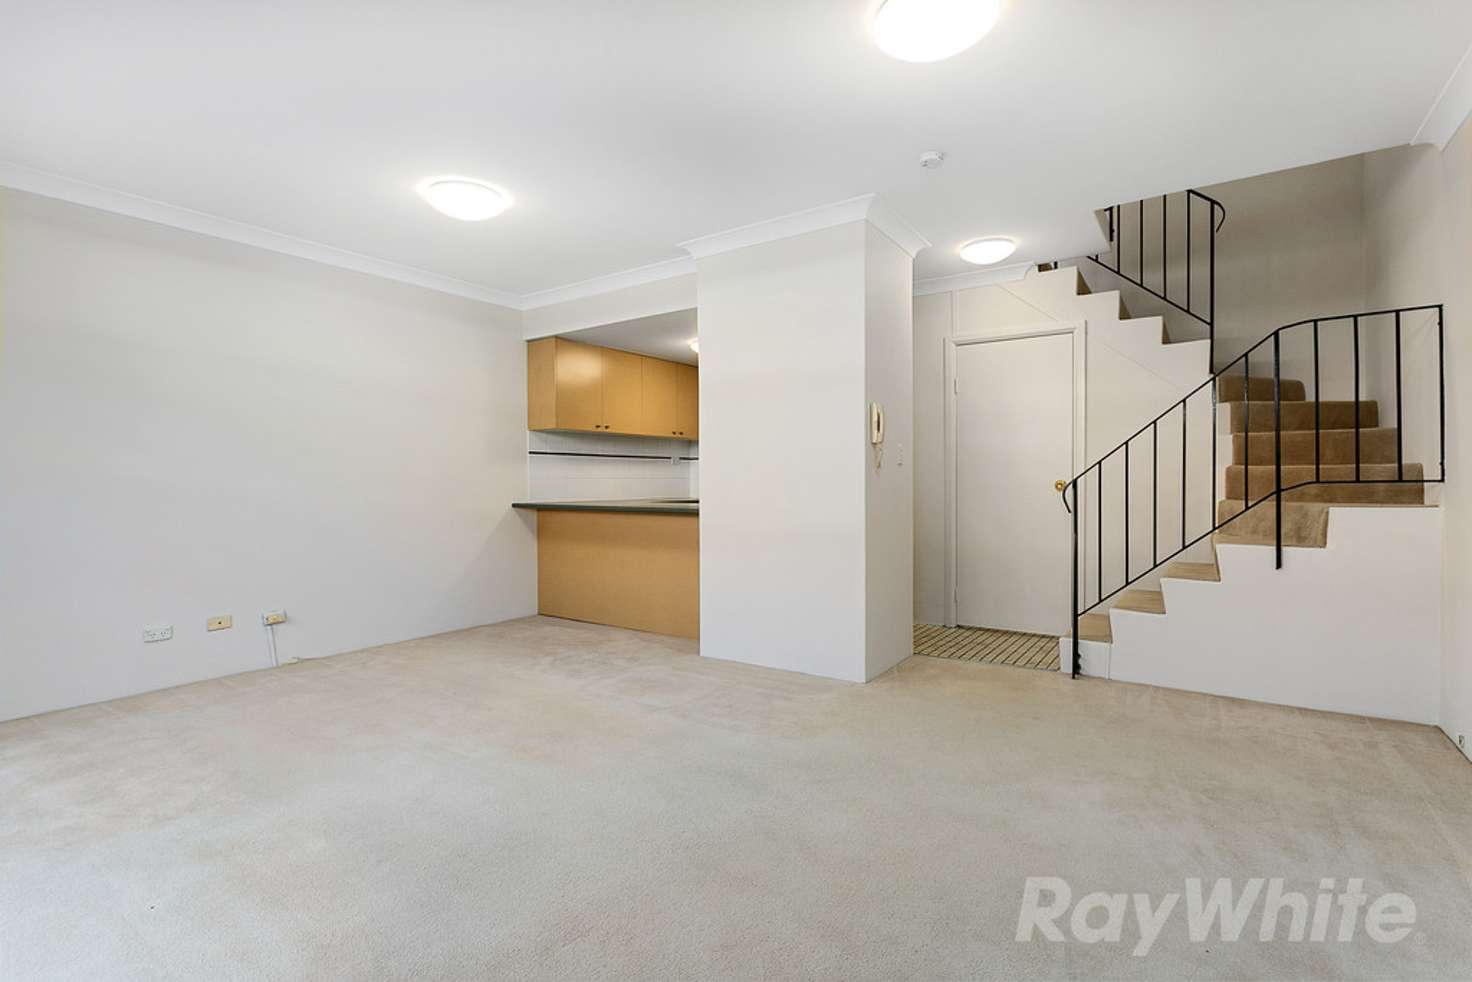 Main view of Homely townhouse listing, 10 / 181 Missenden Rd, Newtown NSW 2042